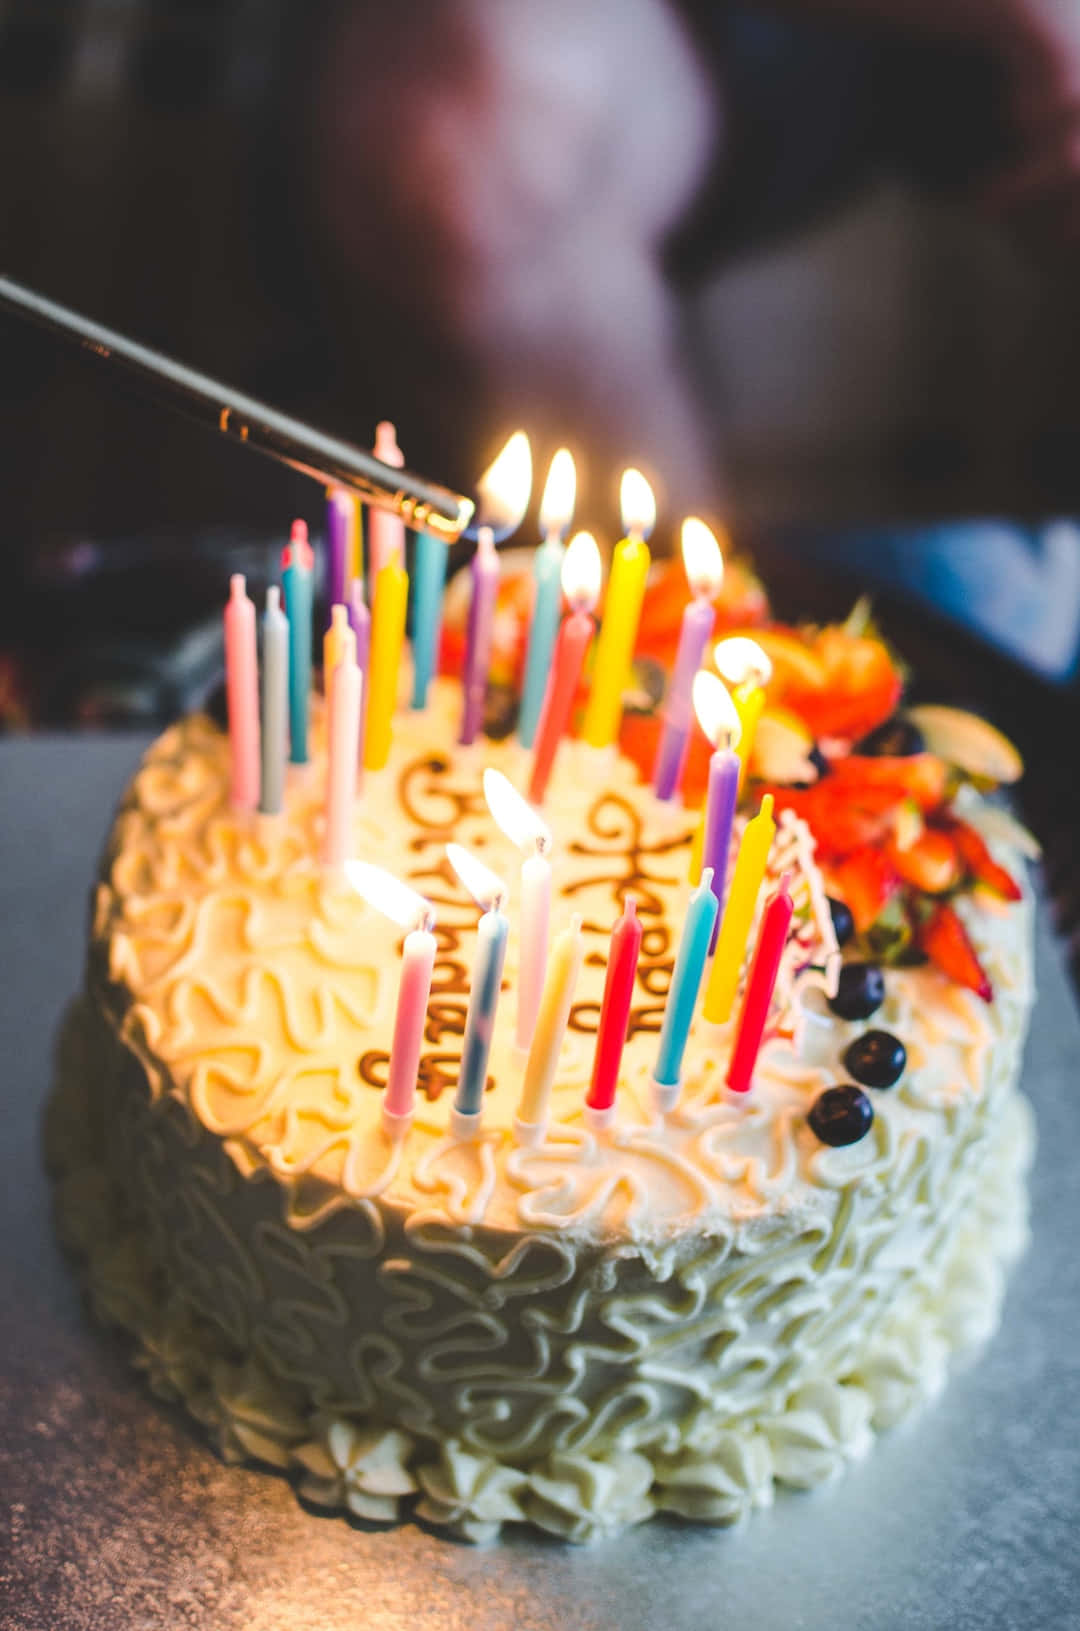 A Birthday Cake With Candles On It